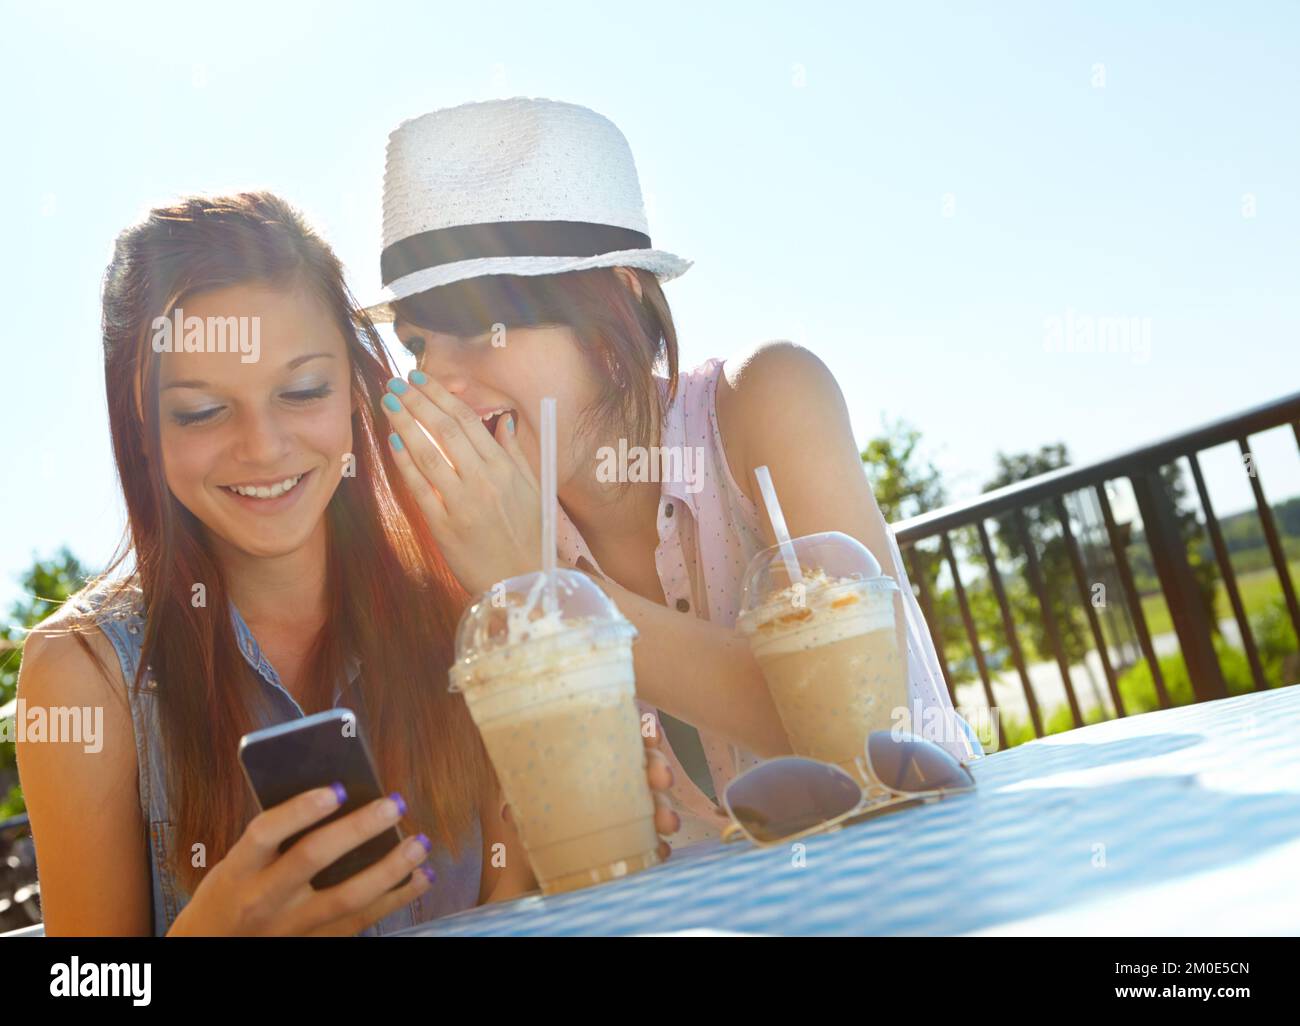 Have you heard...A teenage girl texting on a cellphone while her friend whispers something in her ear. Stock Photo